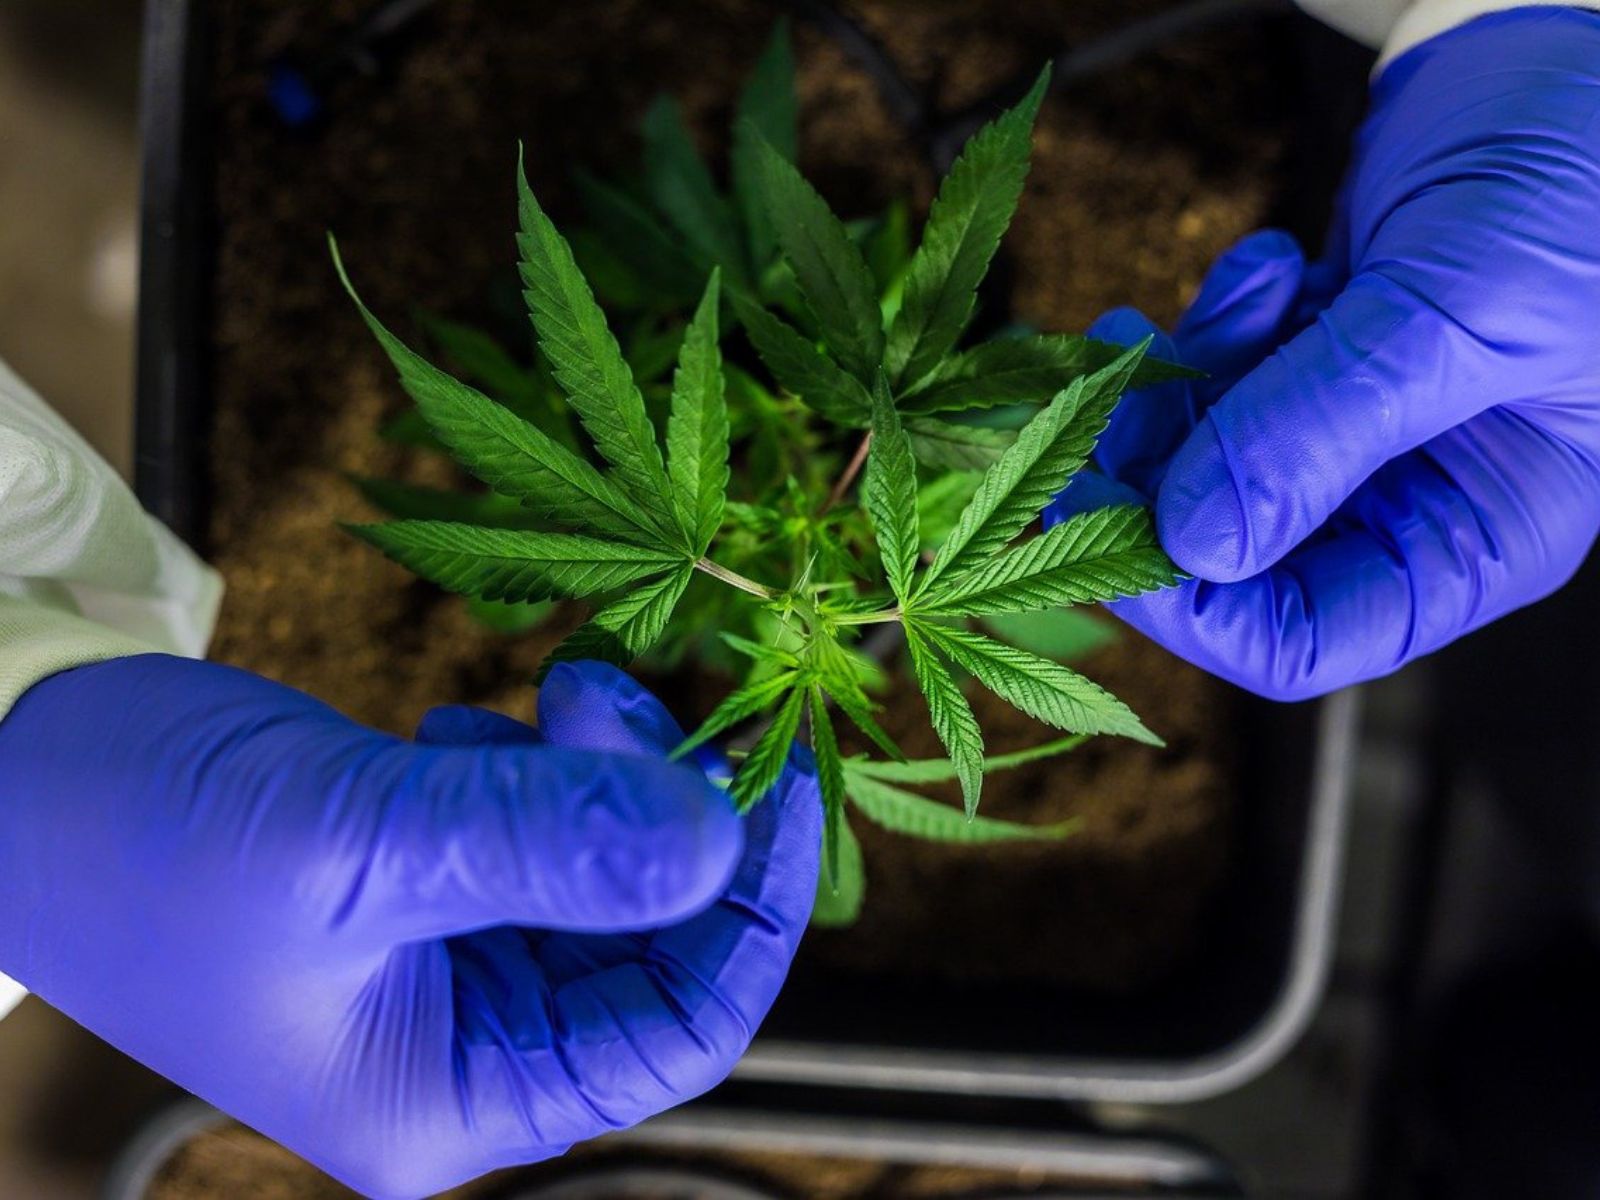 Global Cannabis Testing Market Estimated To Grow By $1.5 Billion From 2023-2027